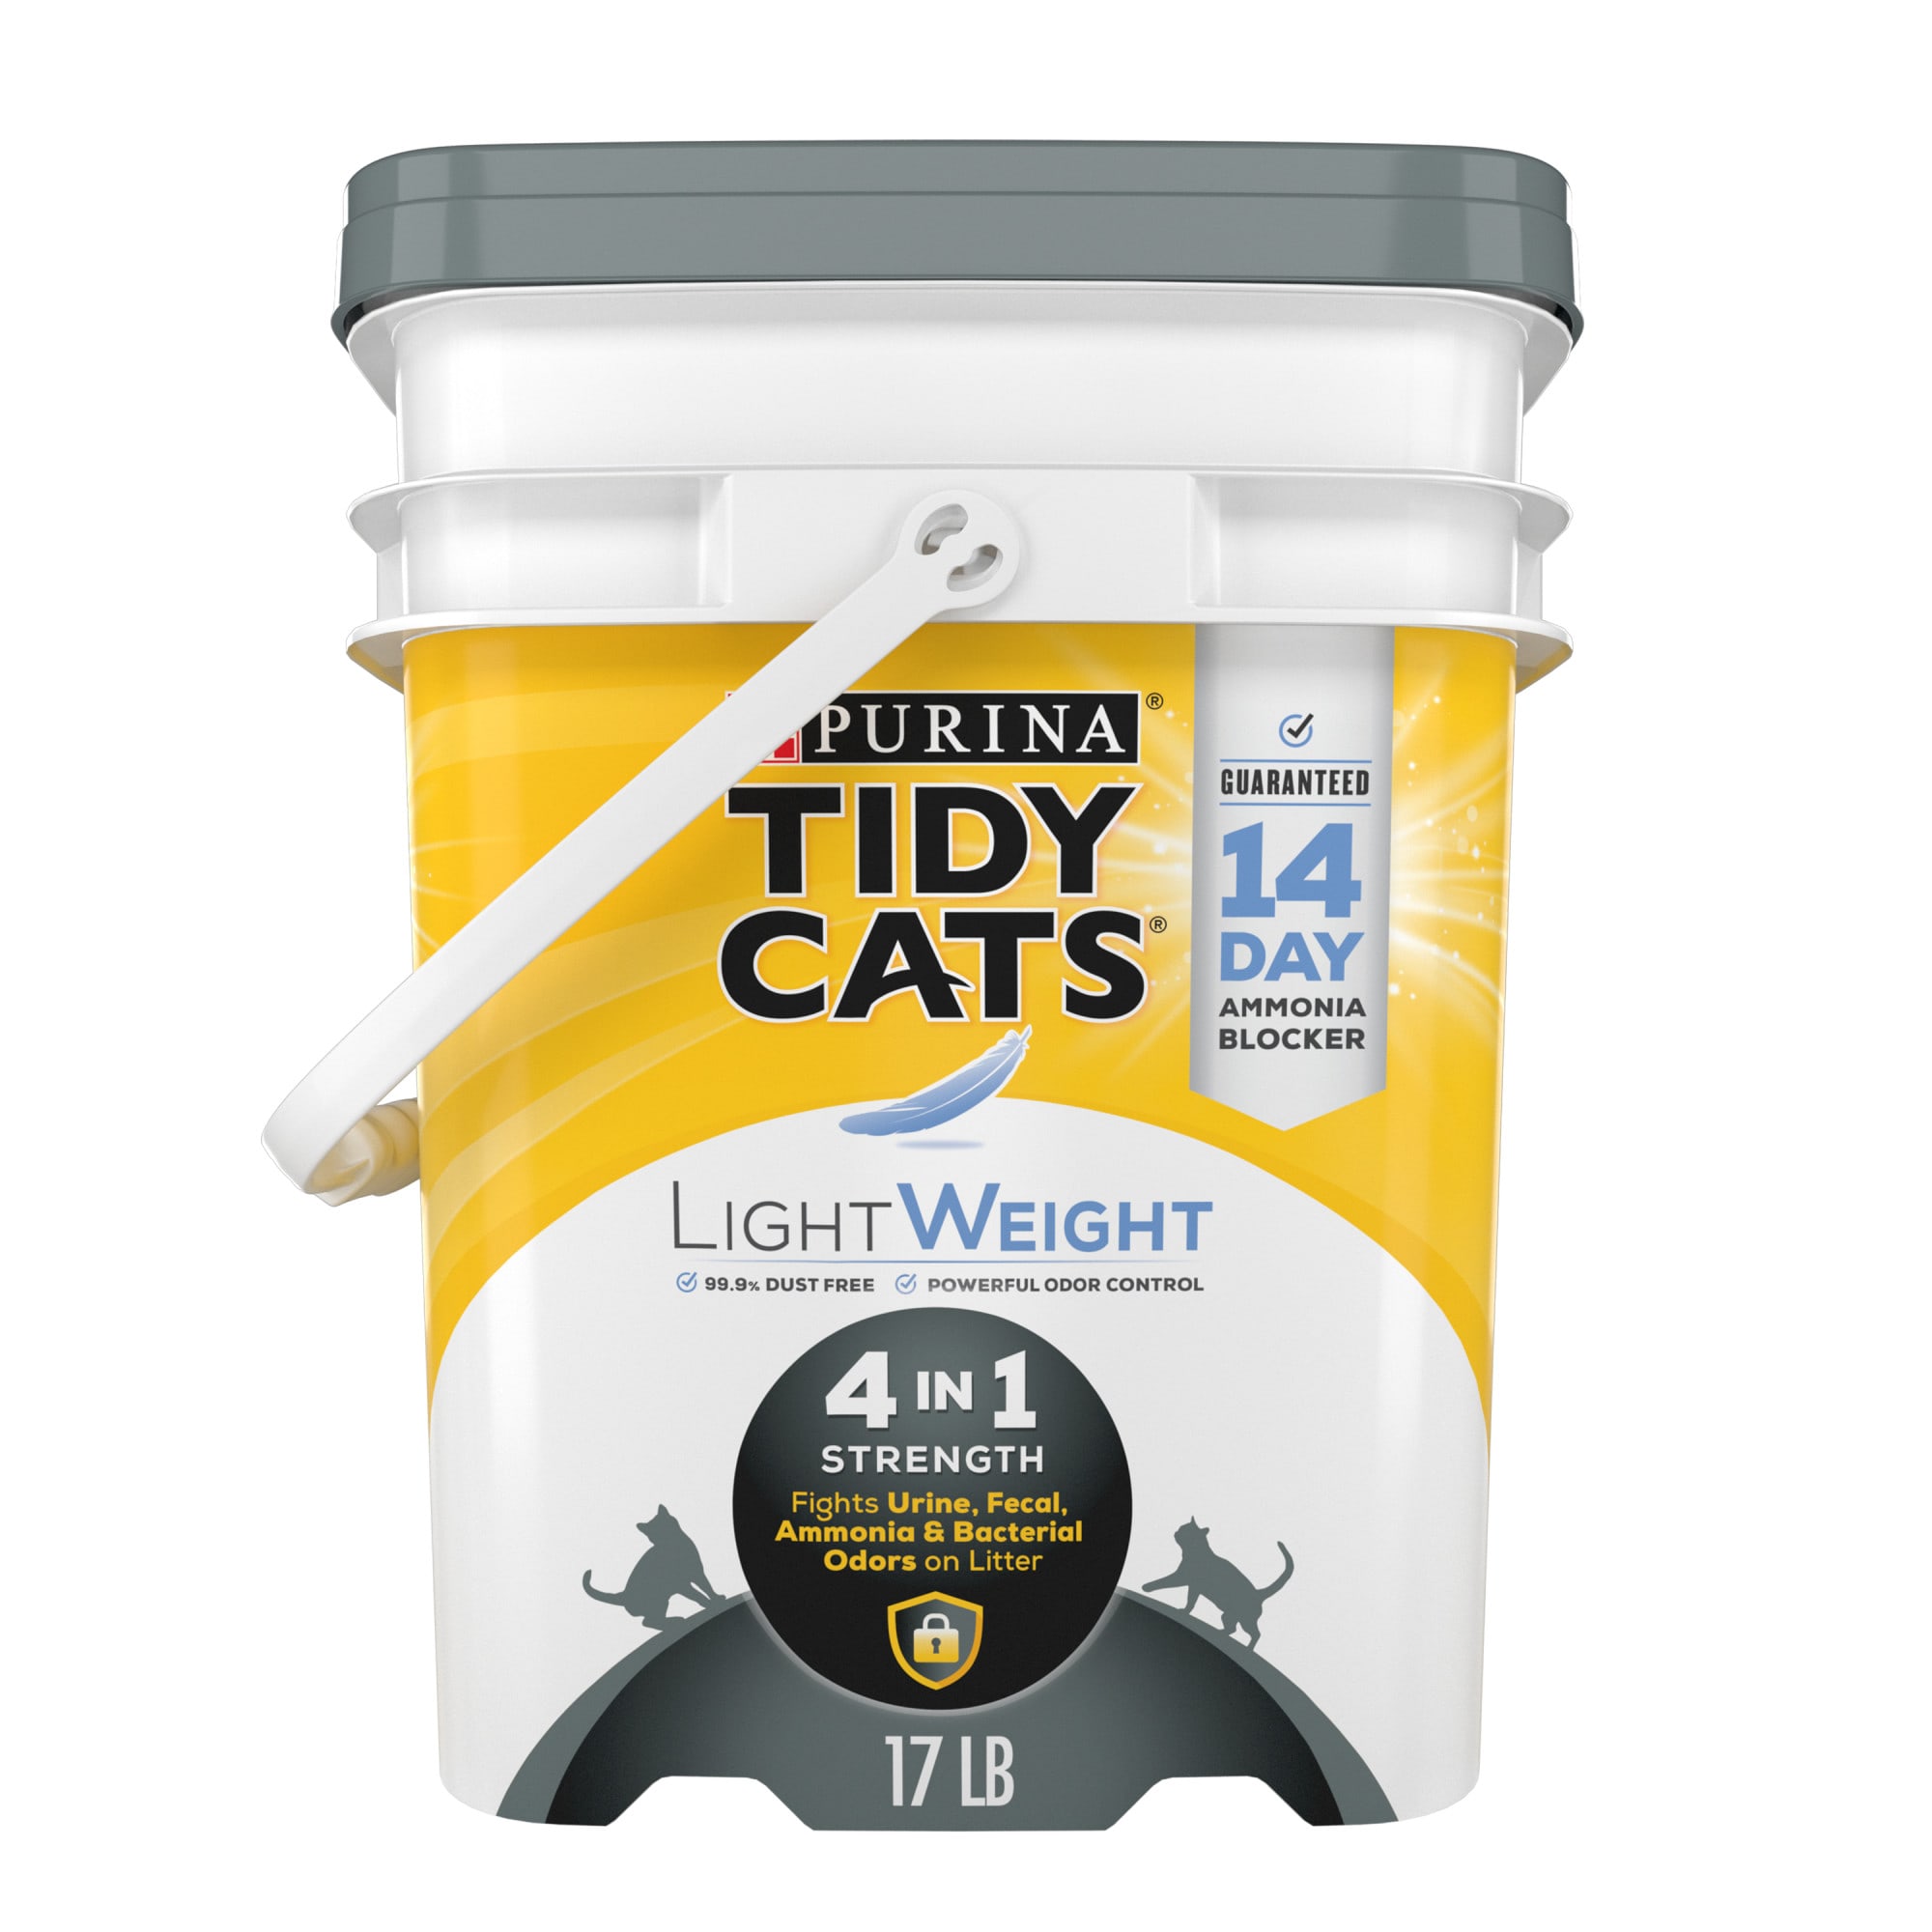 Purina Tidy Cats LightWeight 4-in-1 